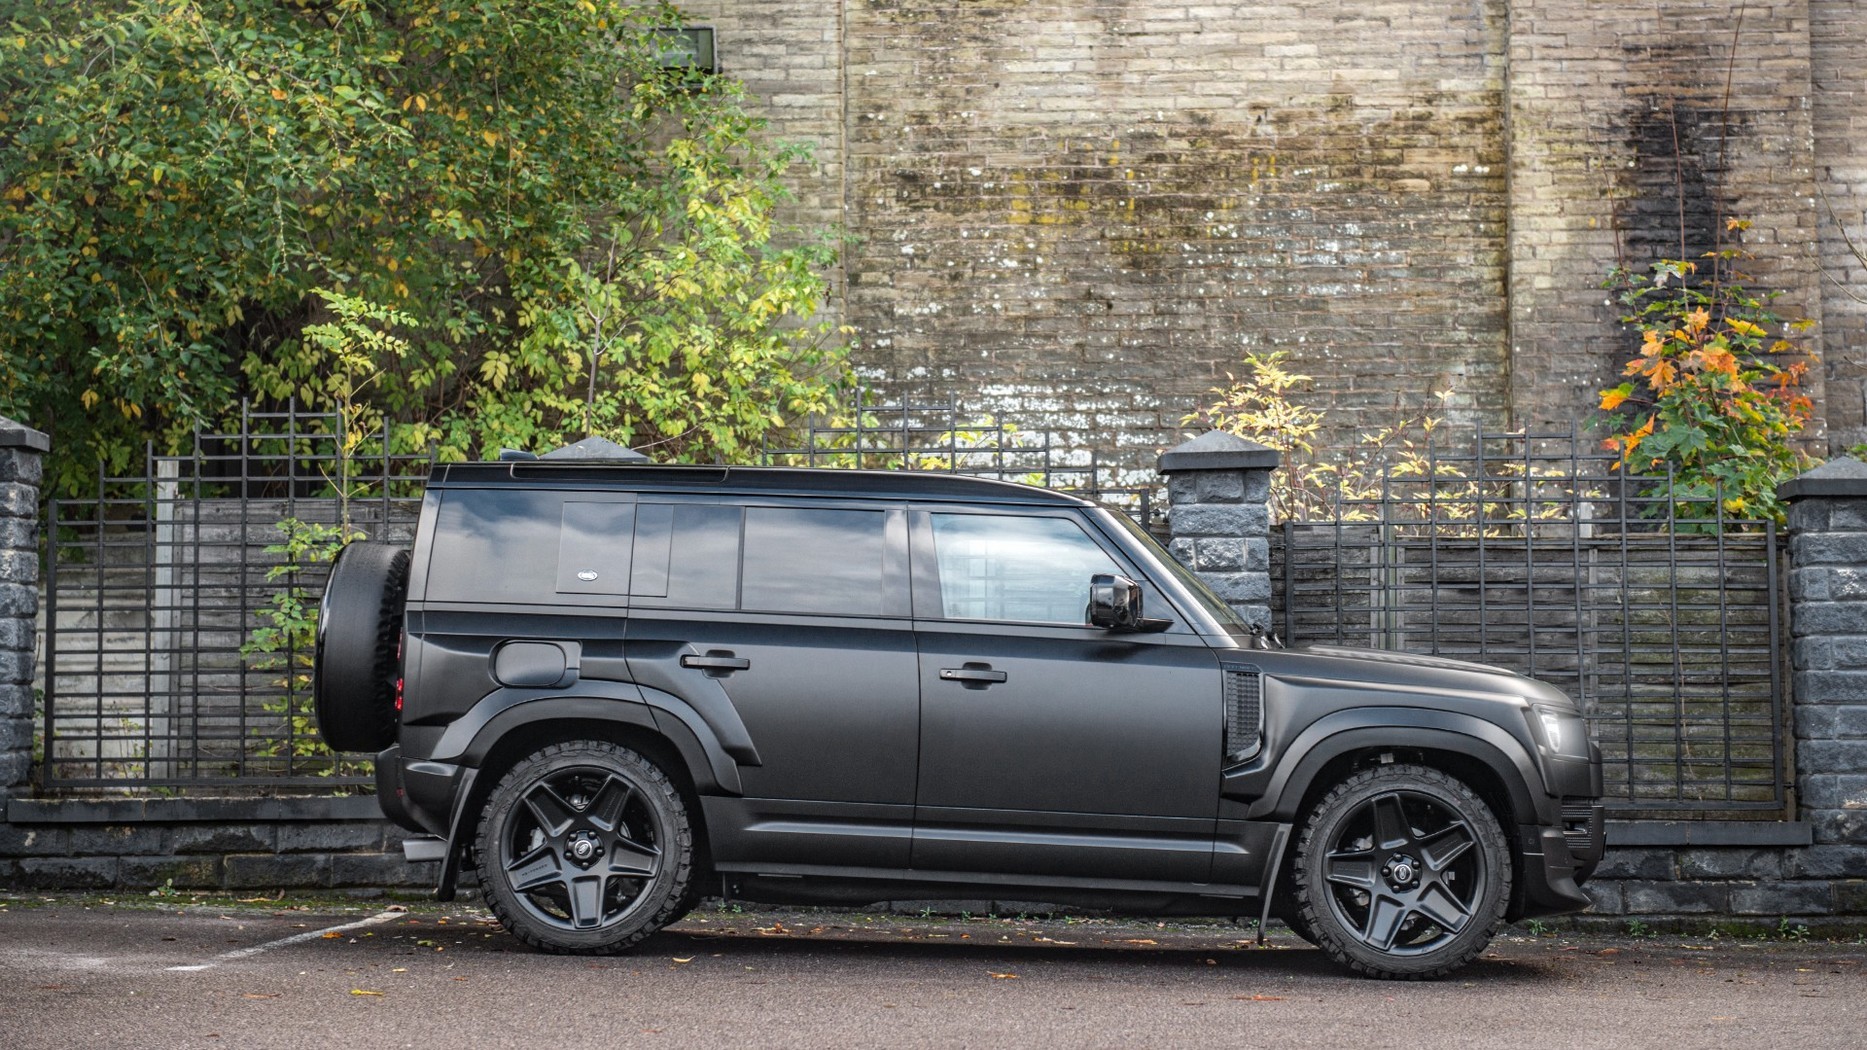 Land Rover Defender Gets Wide Body Looks Thanks to Chelsea Truck ...